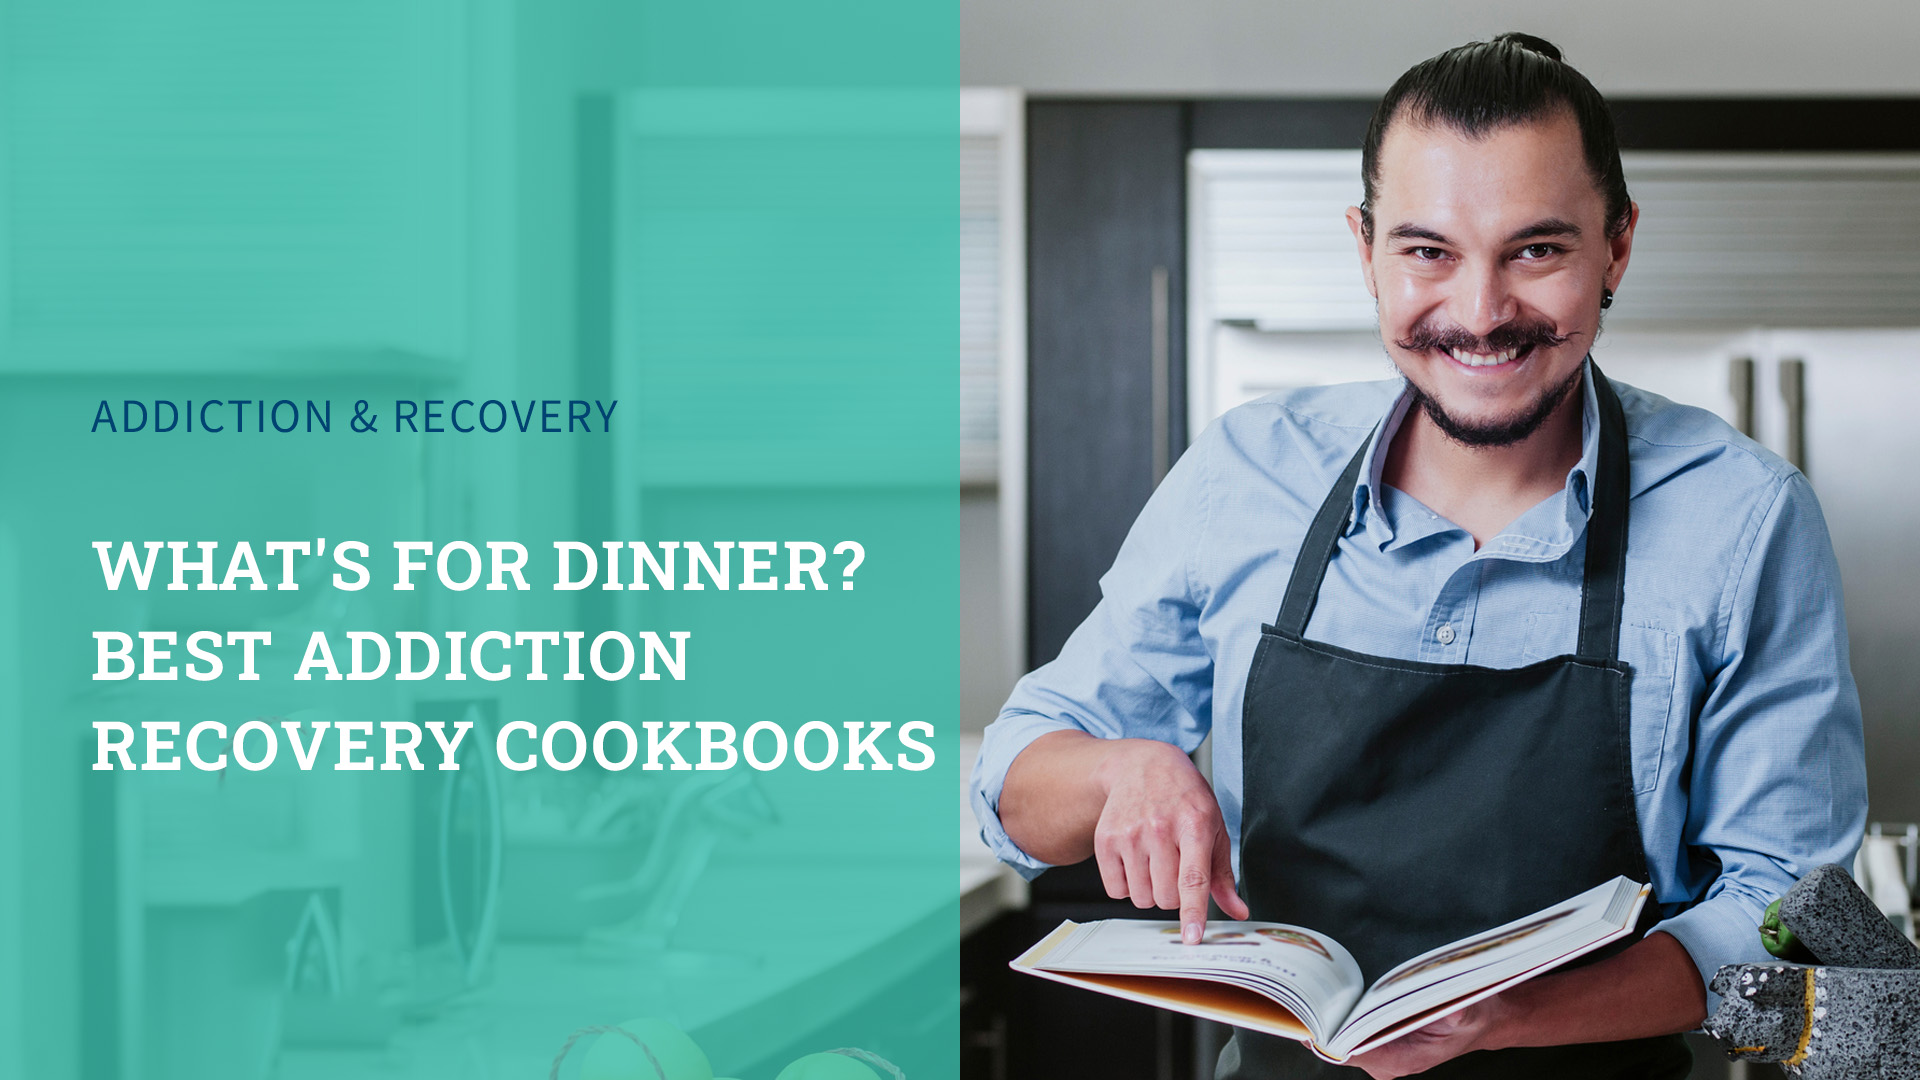 What’s for Dinner? Best Addiction Recovery Cookbooks